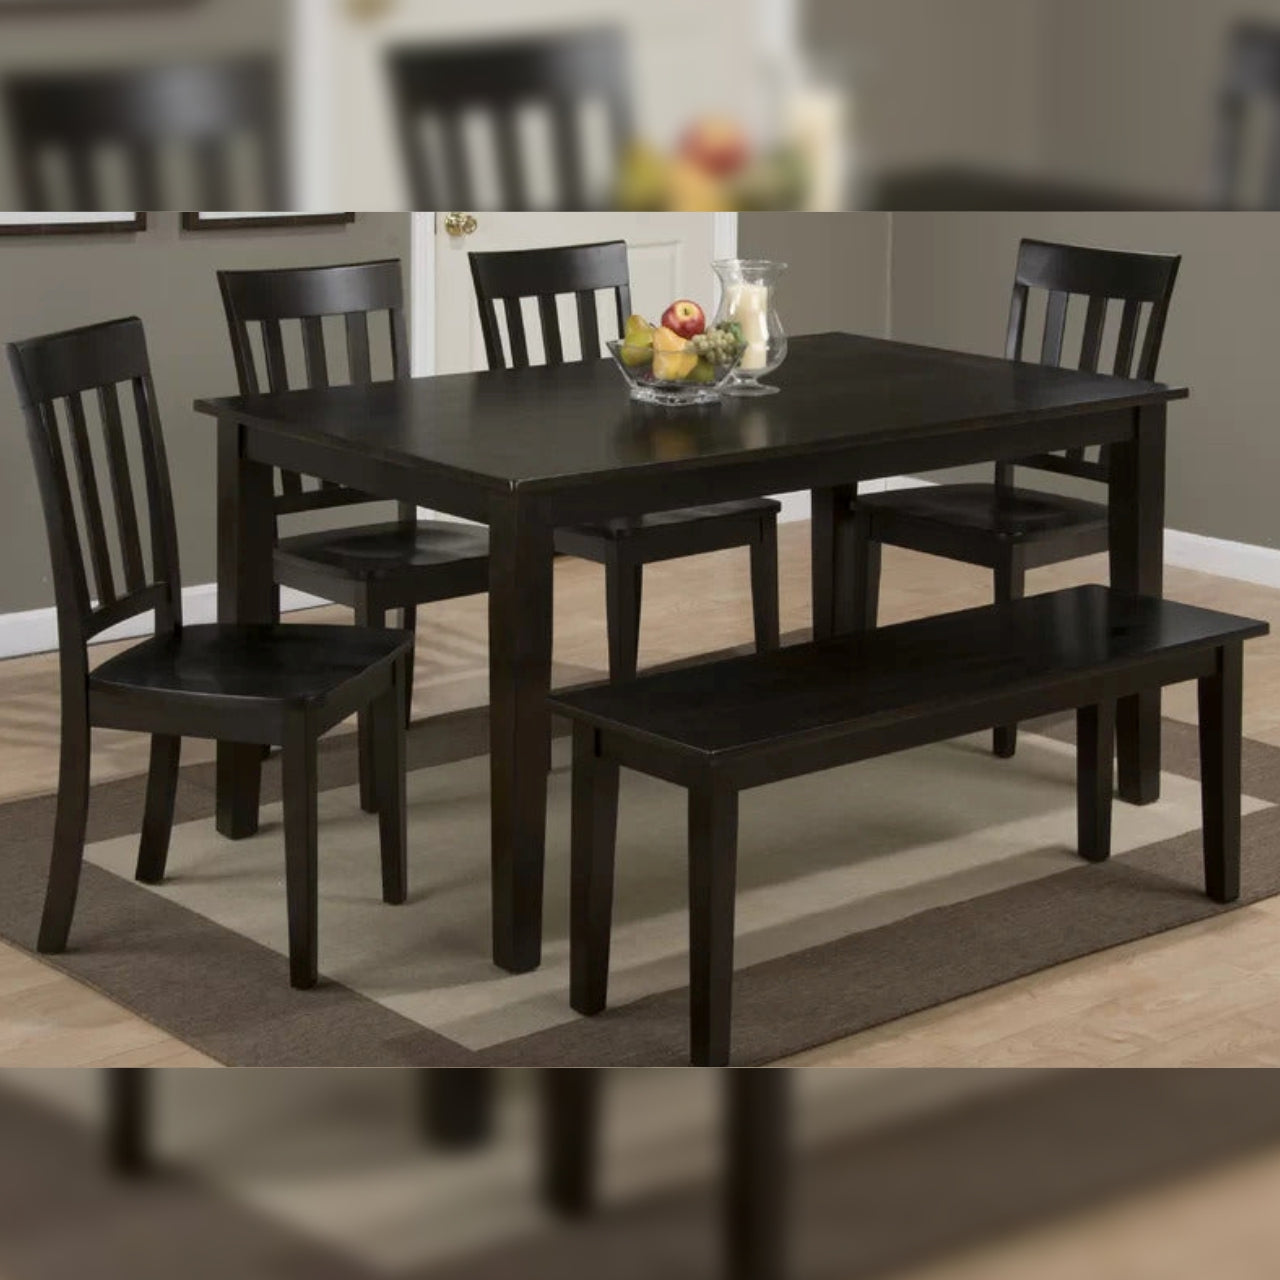 Dining Set: Dining Table with 6 Chairs Wood Dining Set